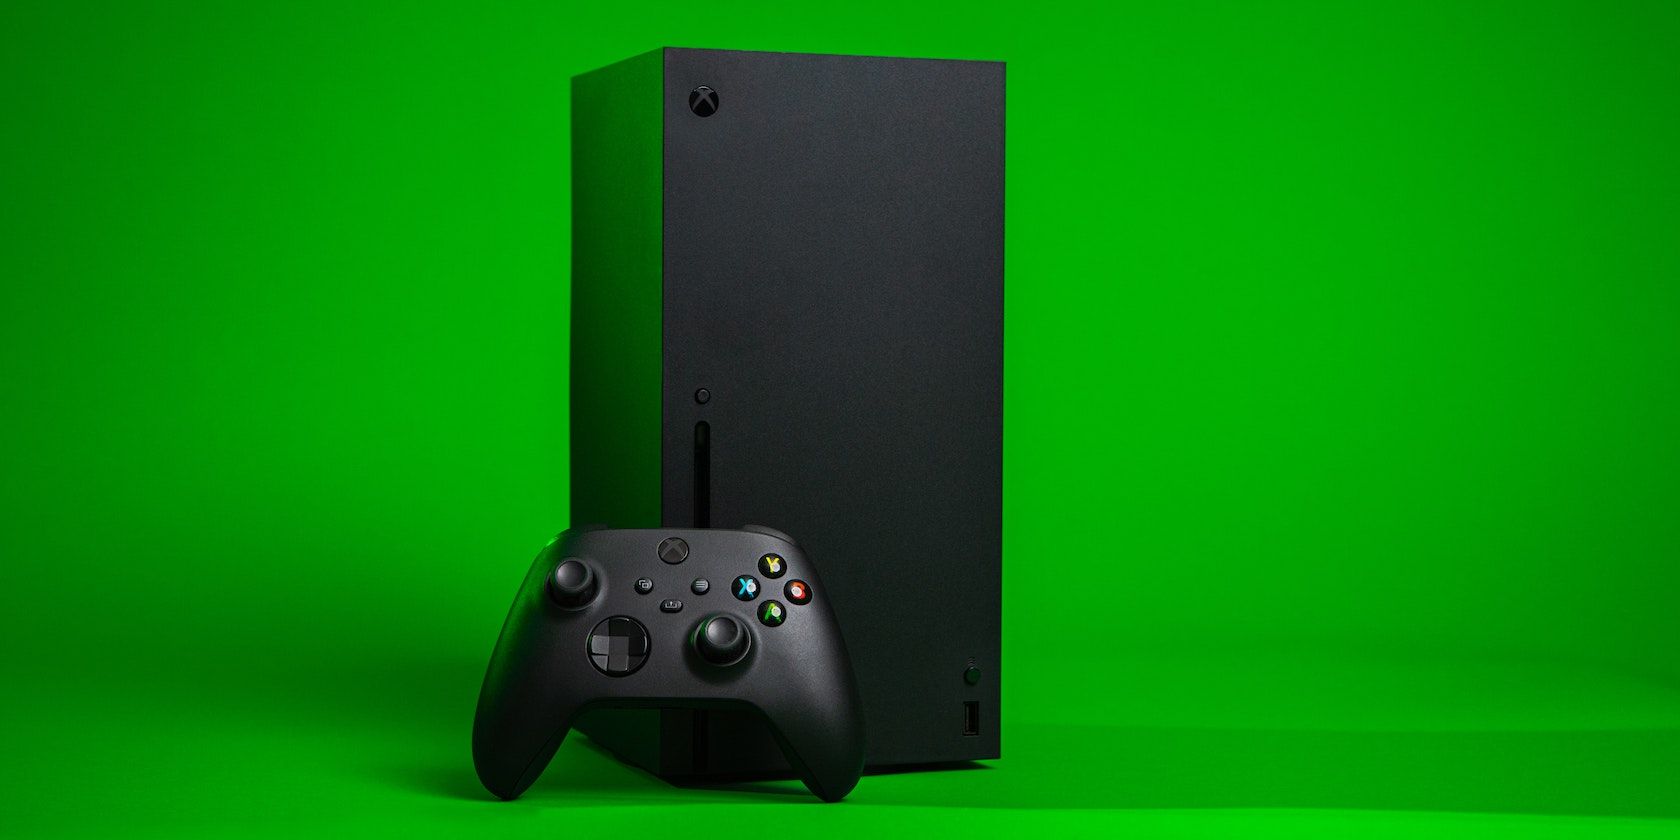 An Xbox Series X and controller with a green background